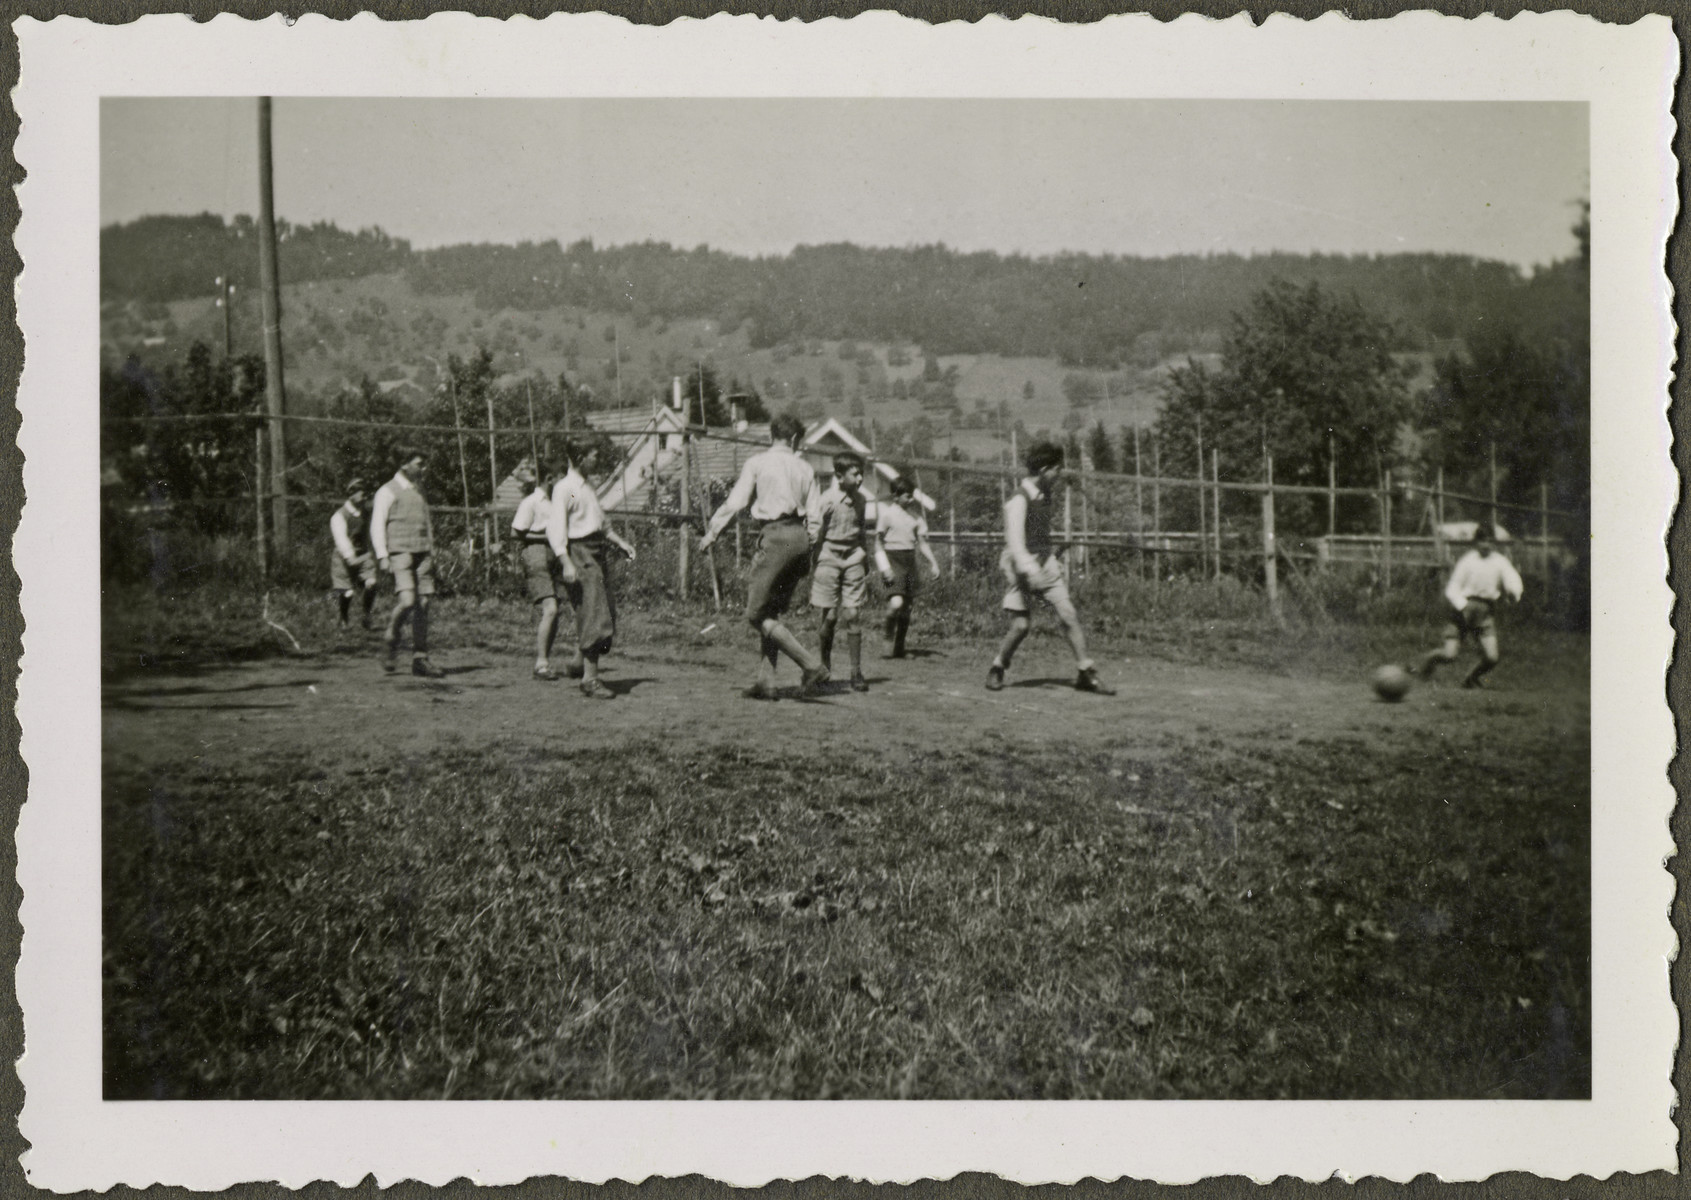 Children play soccer in a home in Heiden, Switzerland.

Manny Mandel is pictured third from the left.  The photograph was posed for the Red Cross.